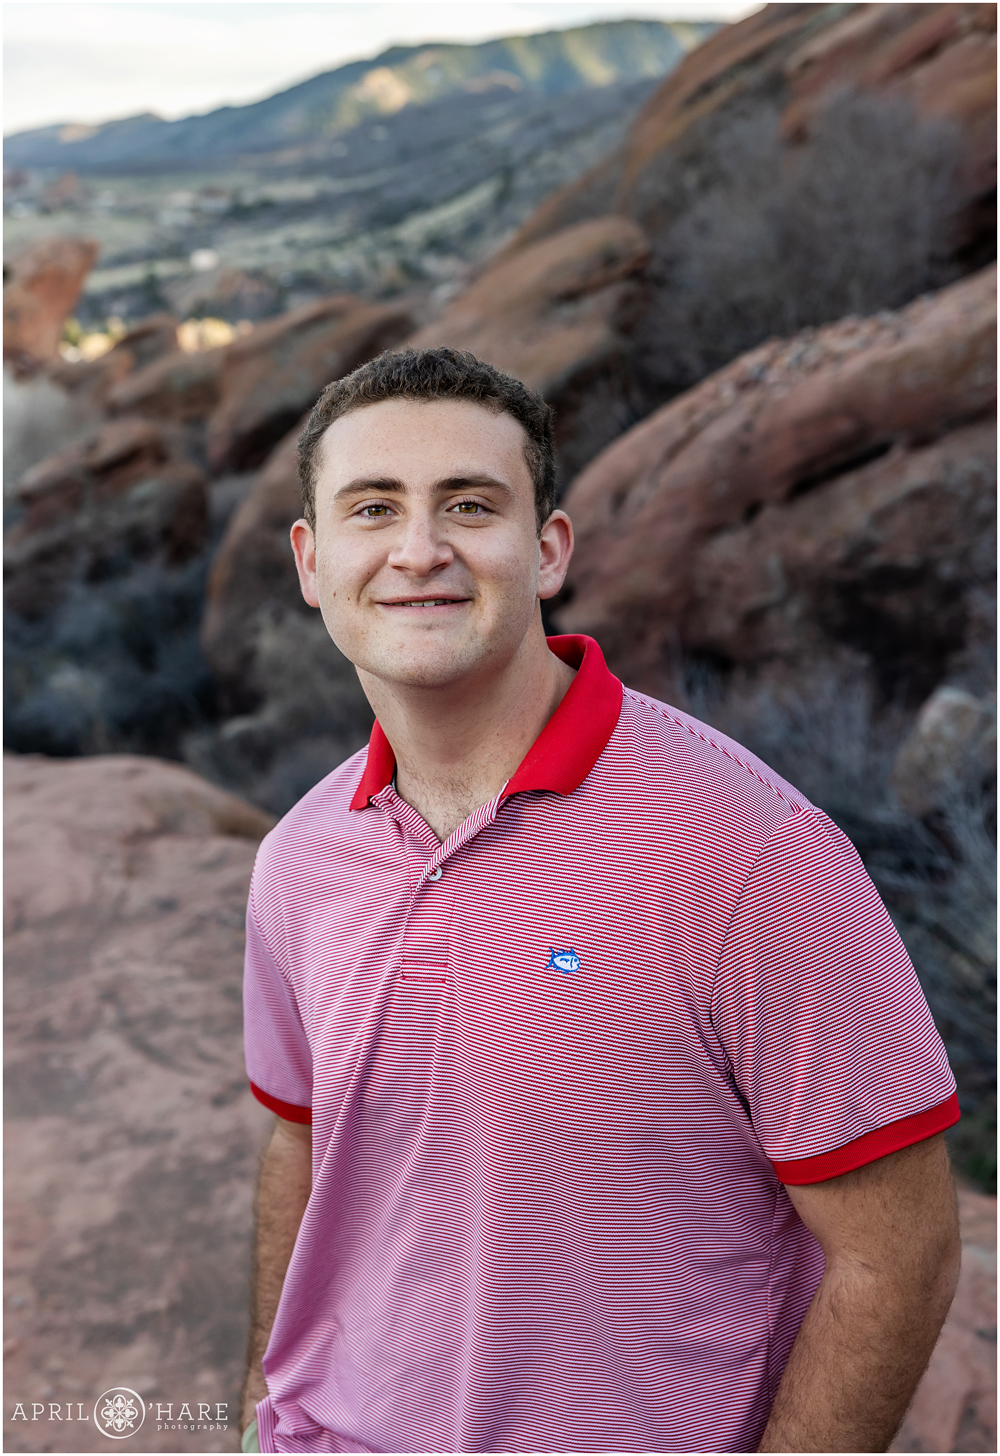 Senior photo of a teen boy wearing a red collared striped shirt at Red Rocks in Morrison Colorado